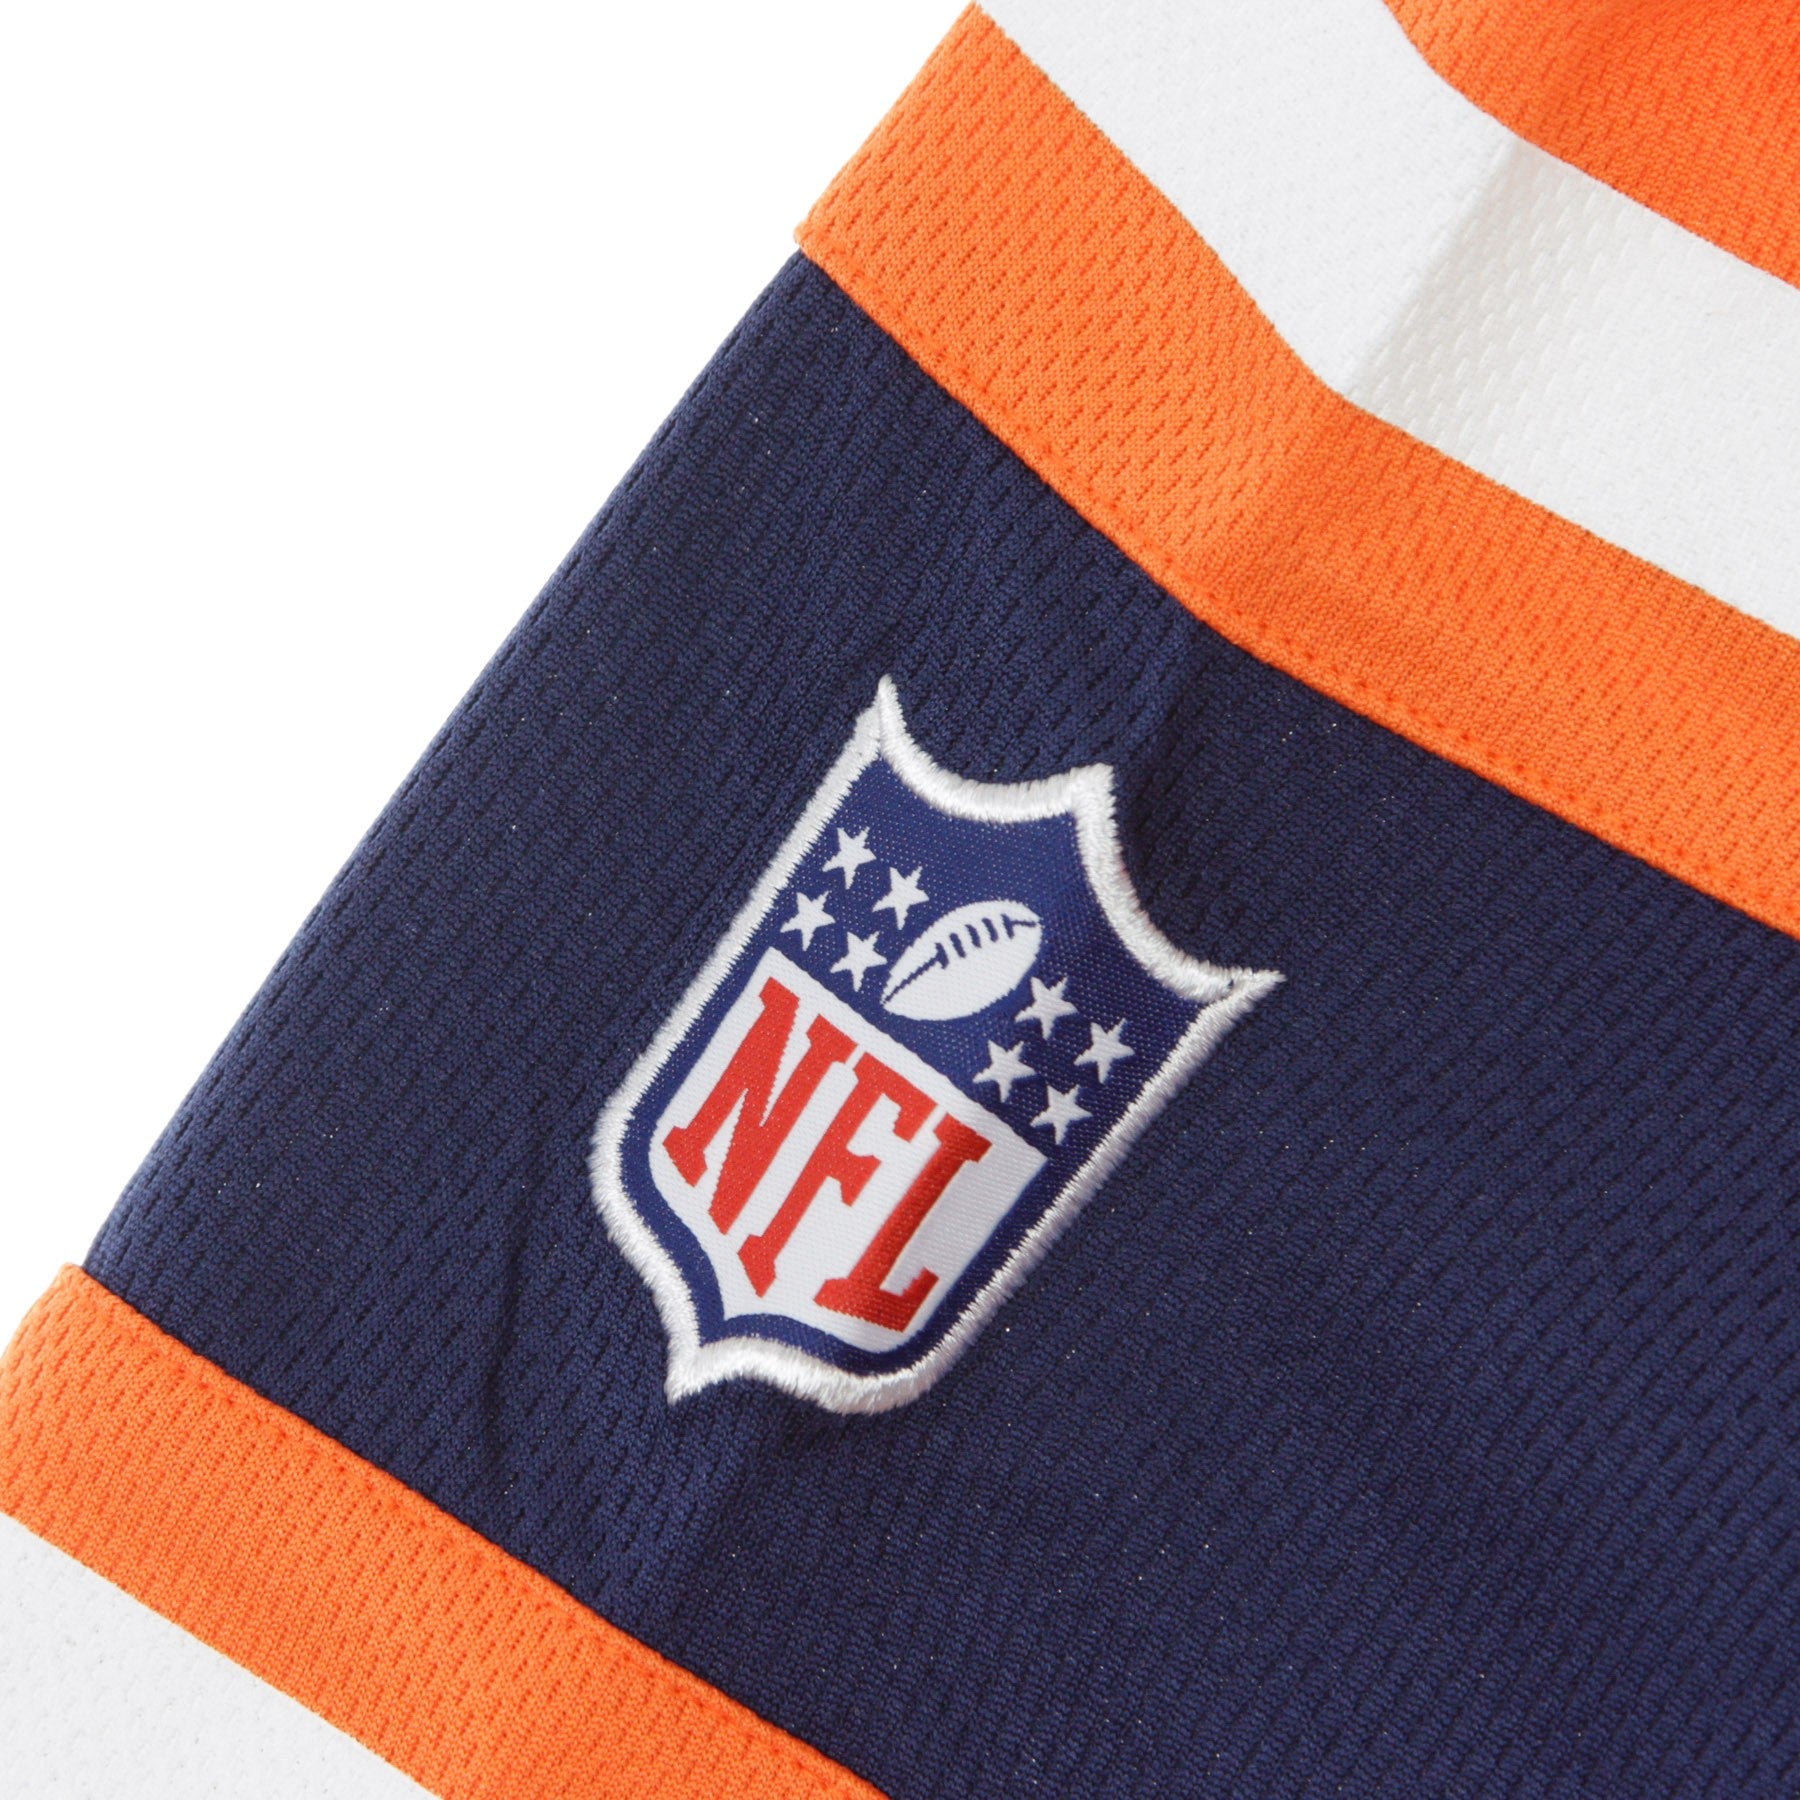 Men's Jersey Nfl Iconic Franchise Poly Mesh Supporters Jersey Denbro Original Team Colors